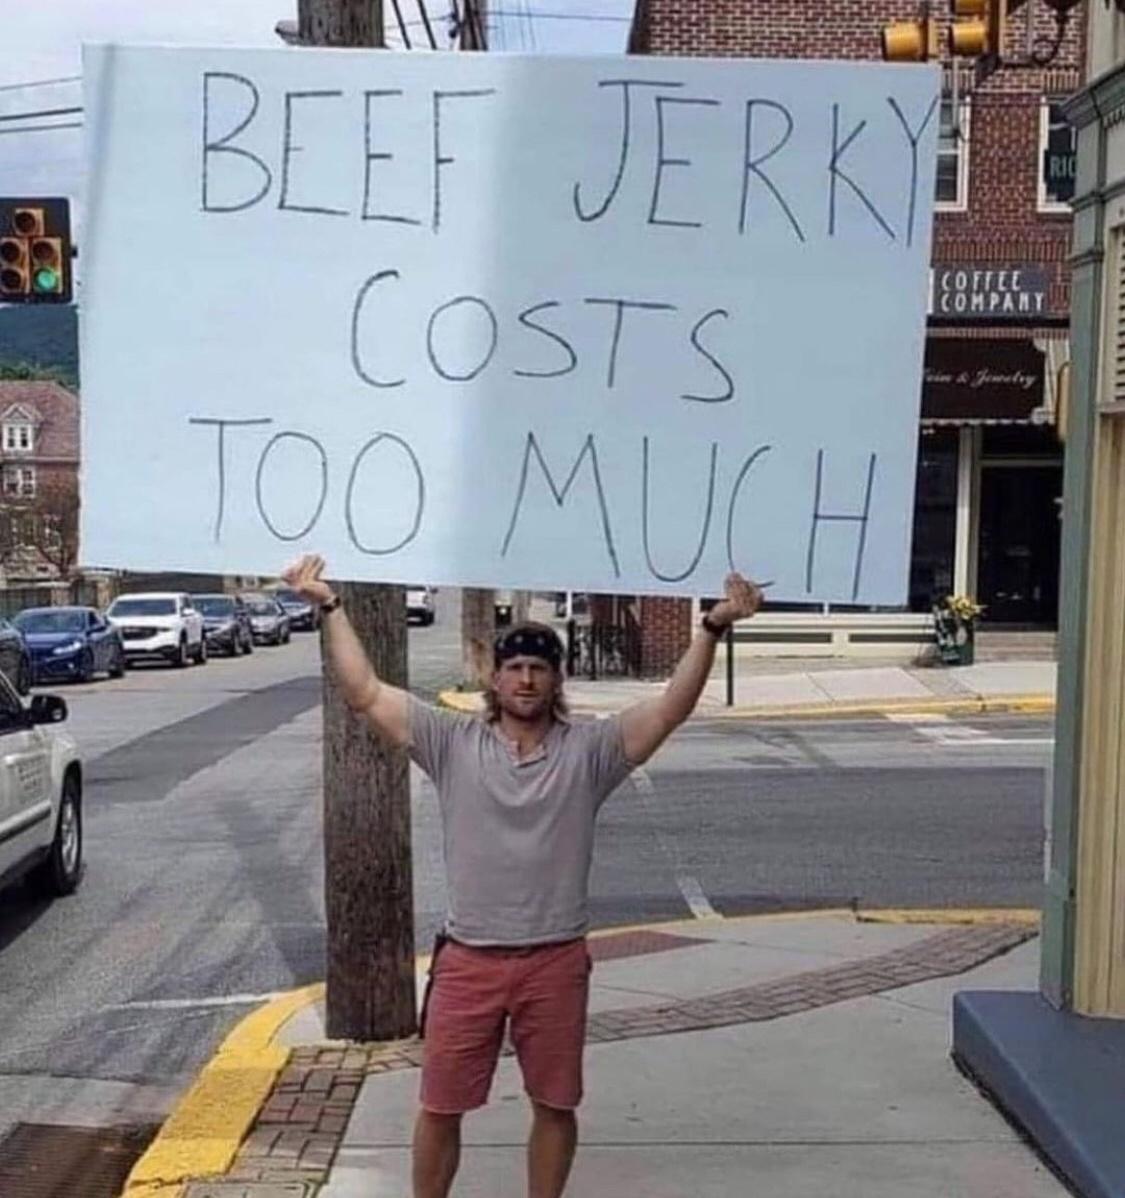 beef jerky costs too much - Beef Jerse Costs Too Much Coffee Company